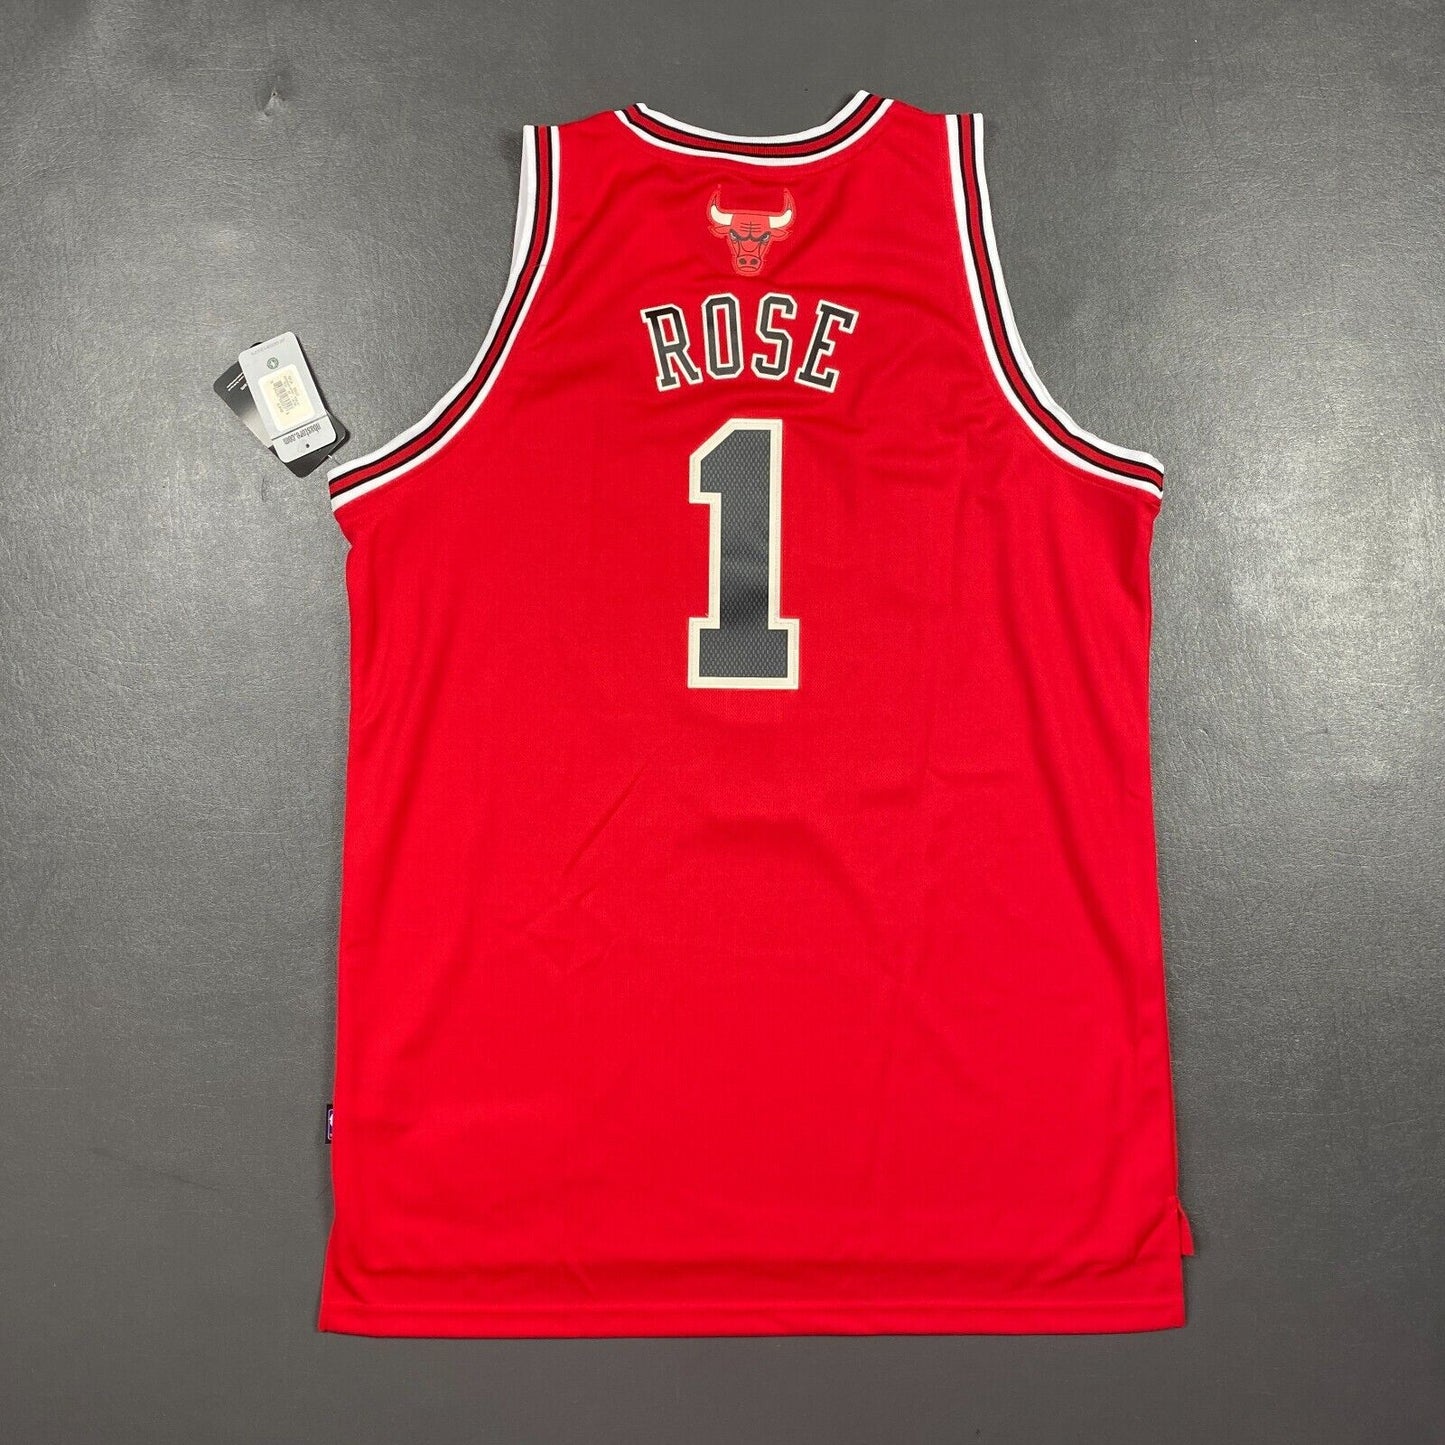 100% Authentic Derrick Rose Adidas Chicago Bulls Jersey Size Size XL+2" Mens